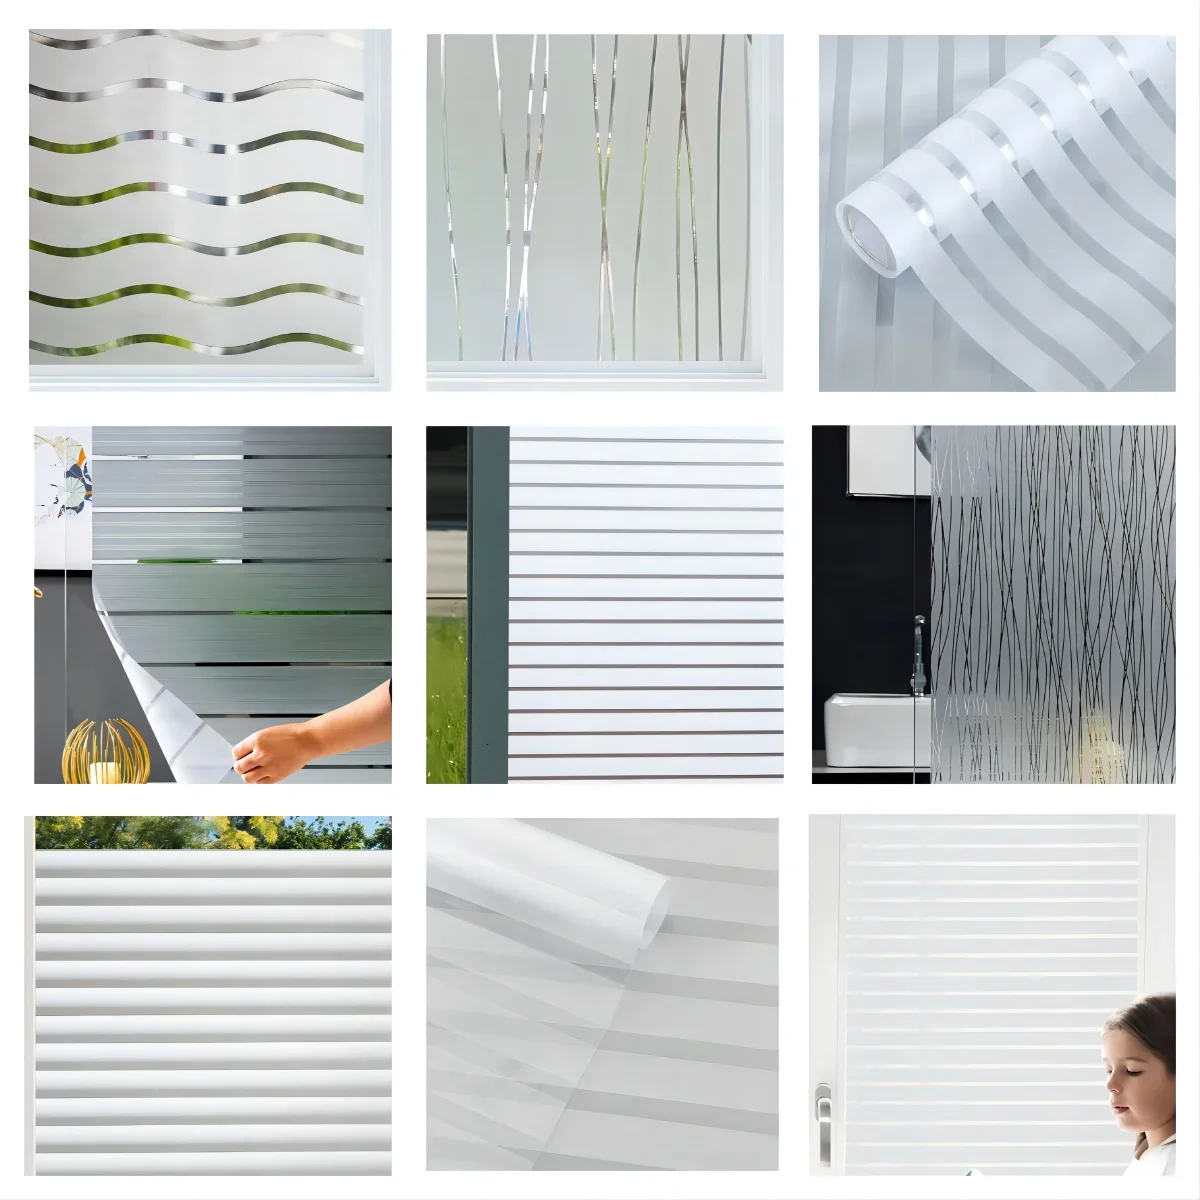 Frosted Window Film Privacy for Glass Windows Stripe Patterns Window Frosting Self-Adhesive Glass Film for Home Office